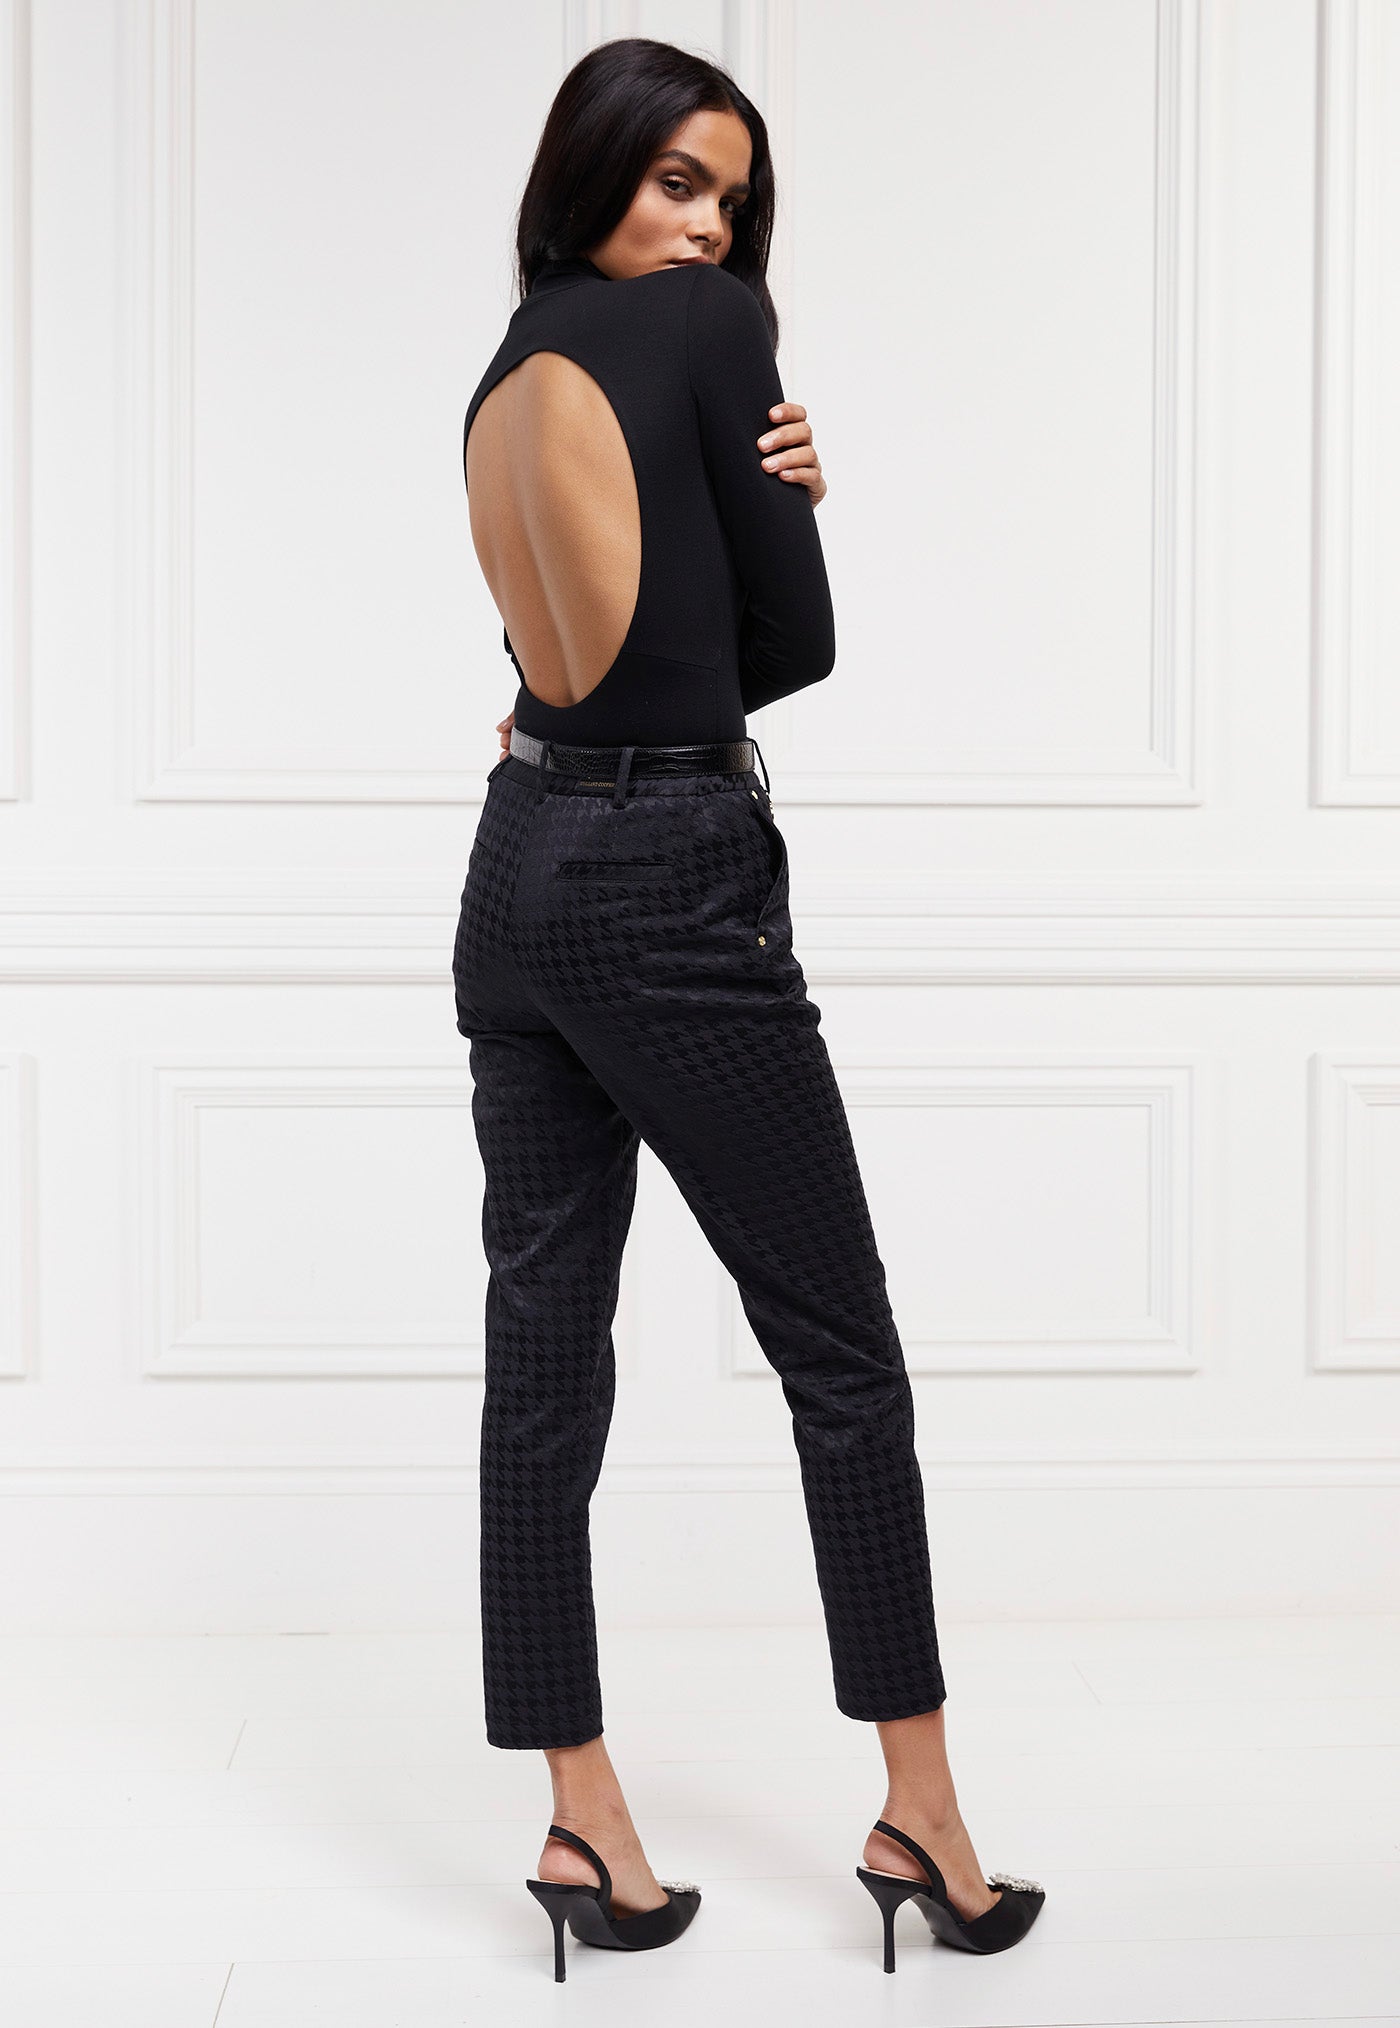 Bexley Tailored Trouser - Houndstooth Jacquard sold by Angel Divine